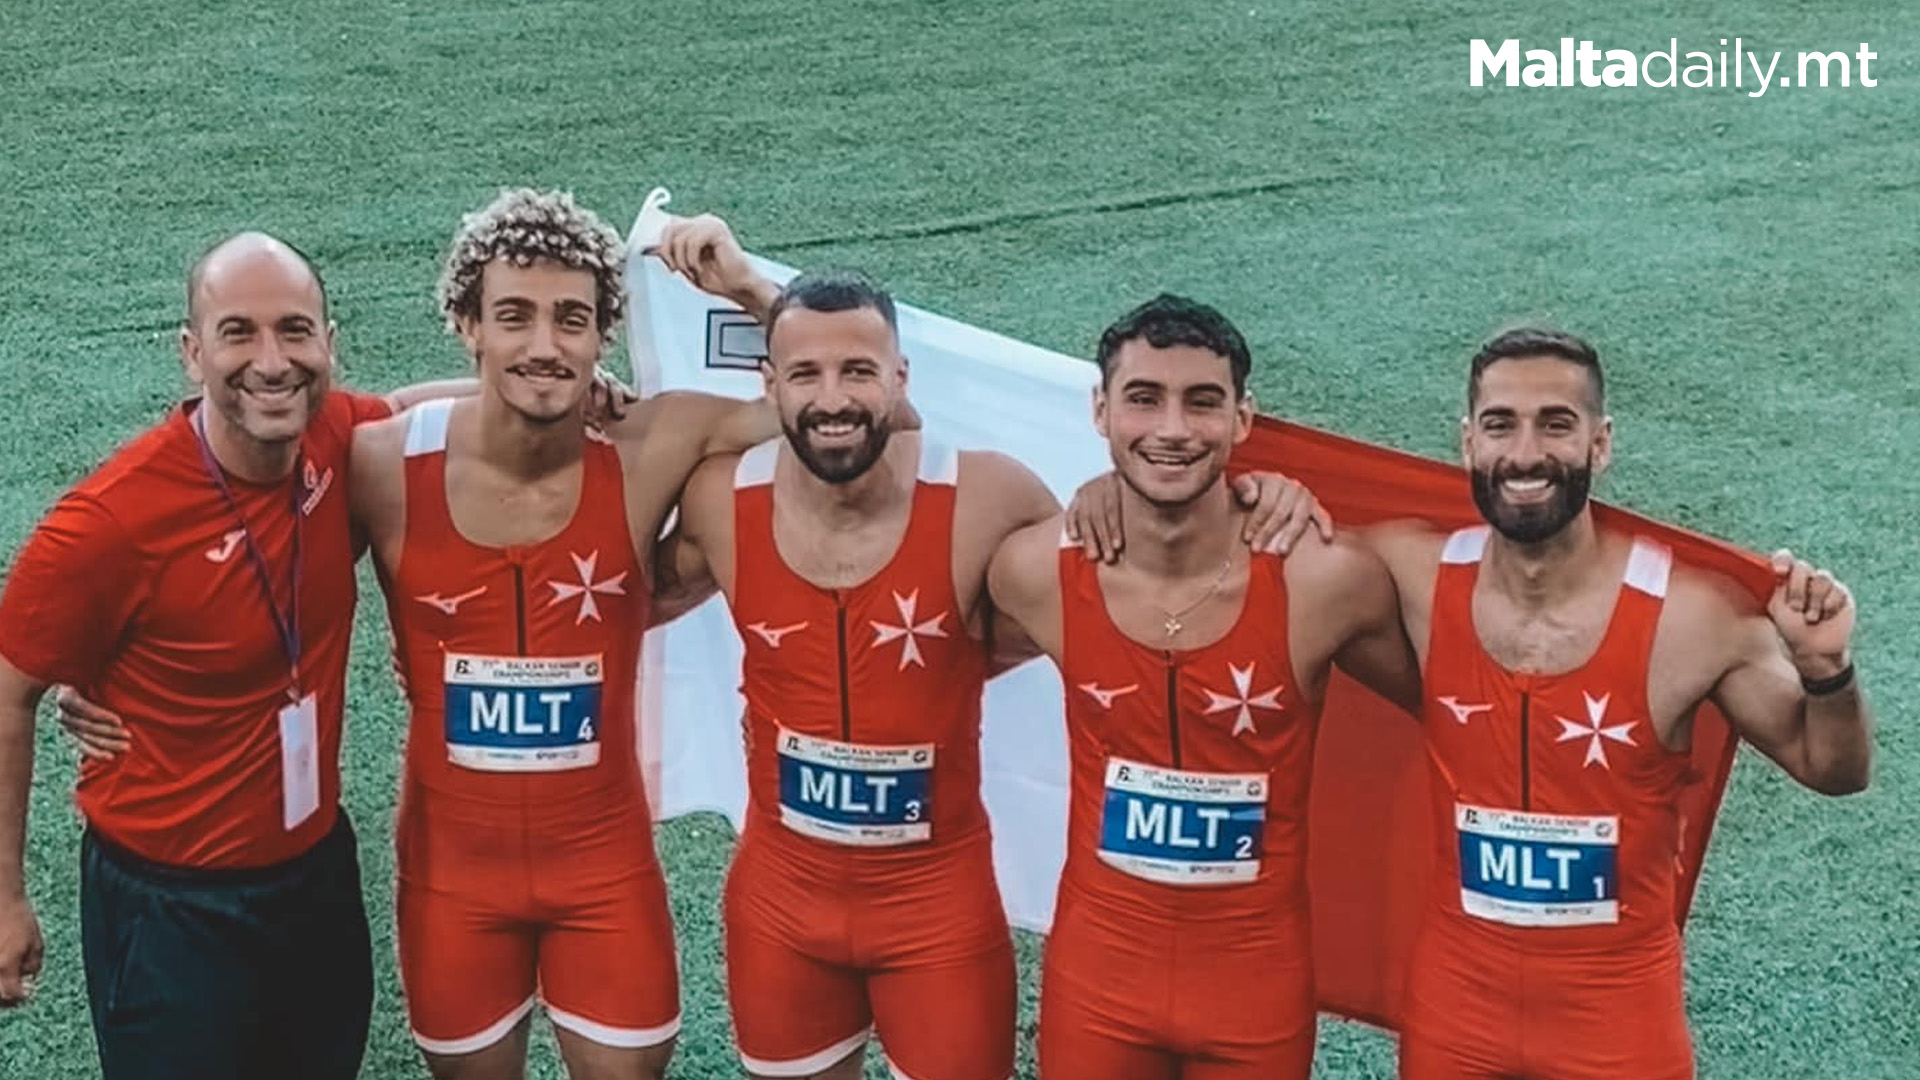 Two Athletics Records For Malta In 100M And 4x100M Races